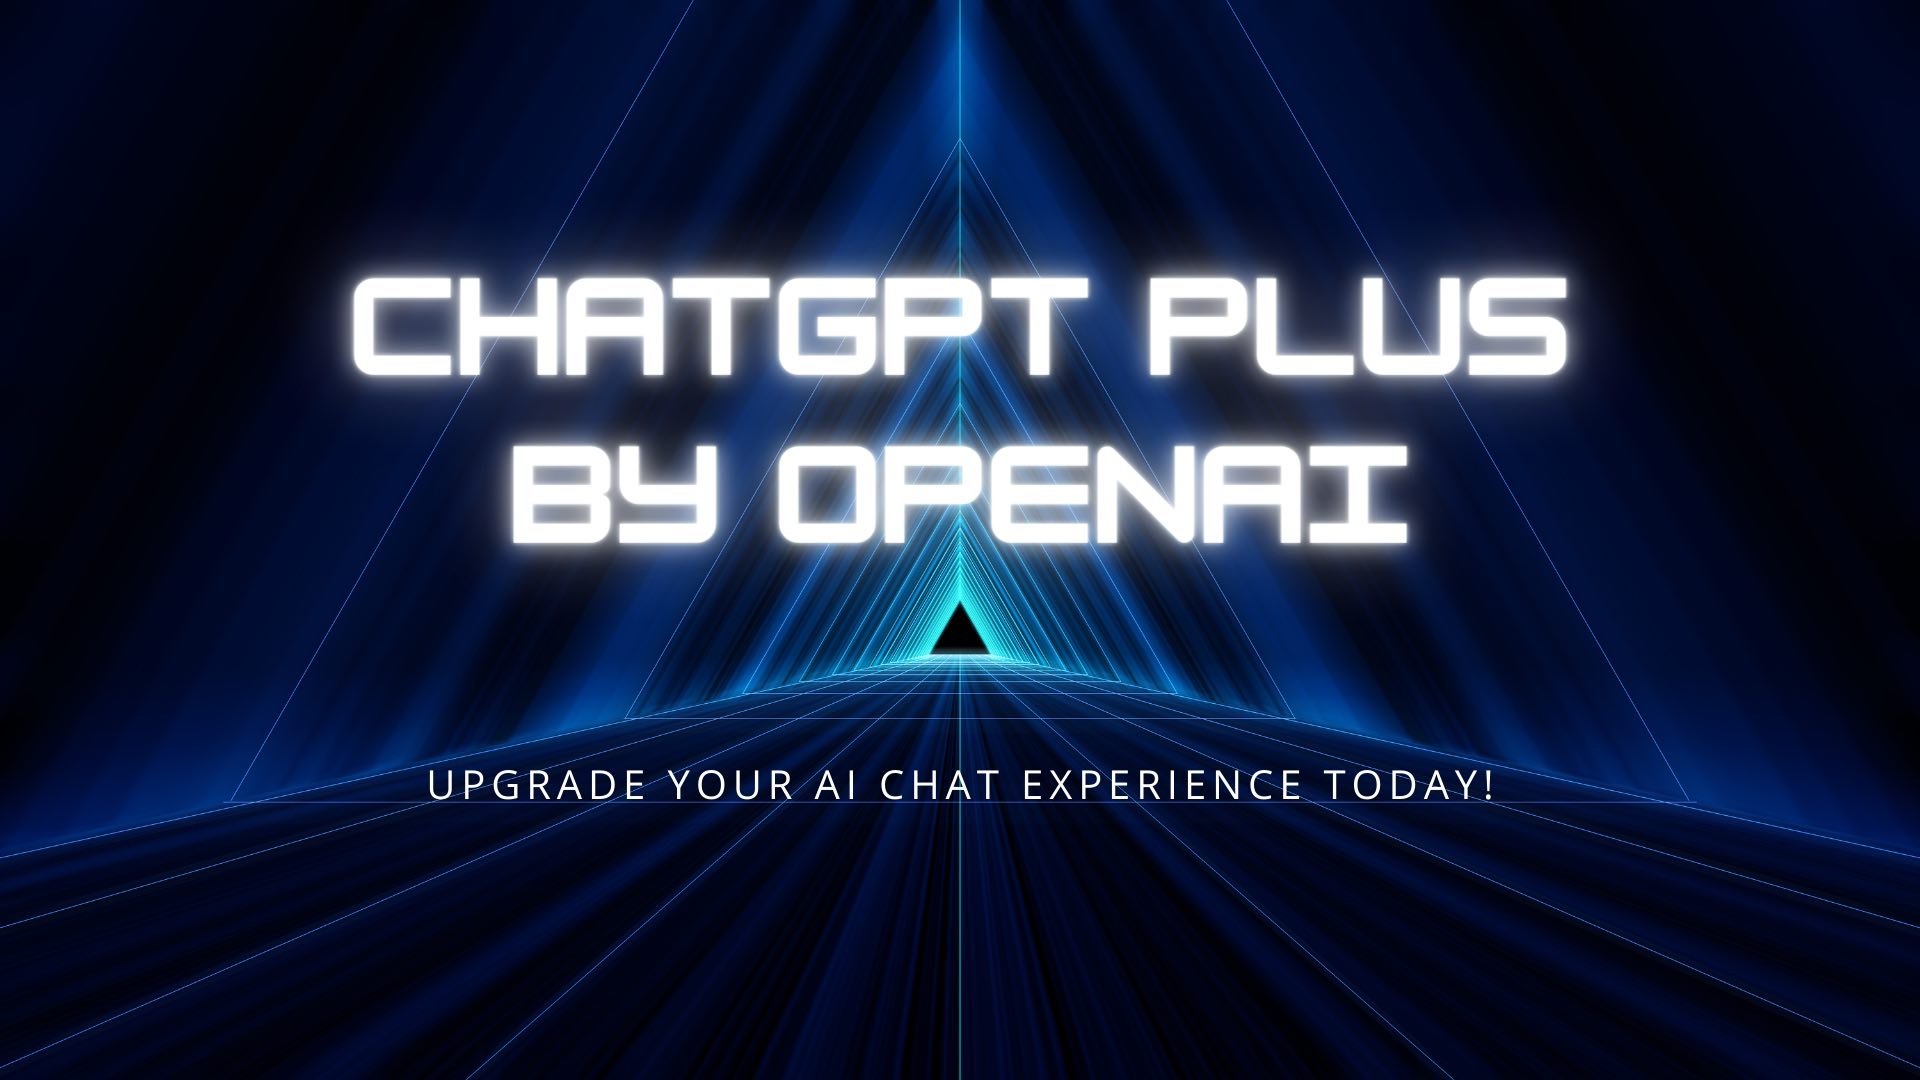 ChatGPT Plus by OpenAI: What is ChatGPT Plus?